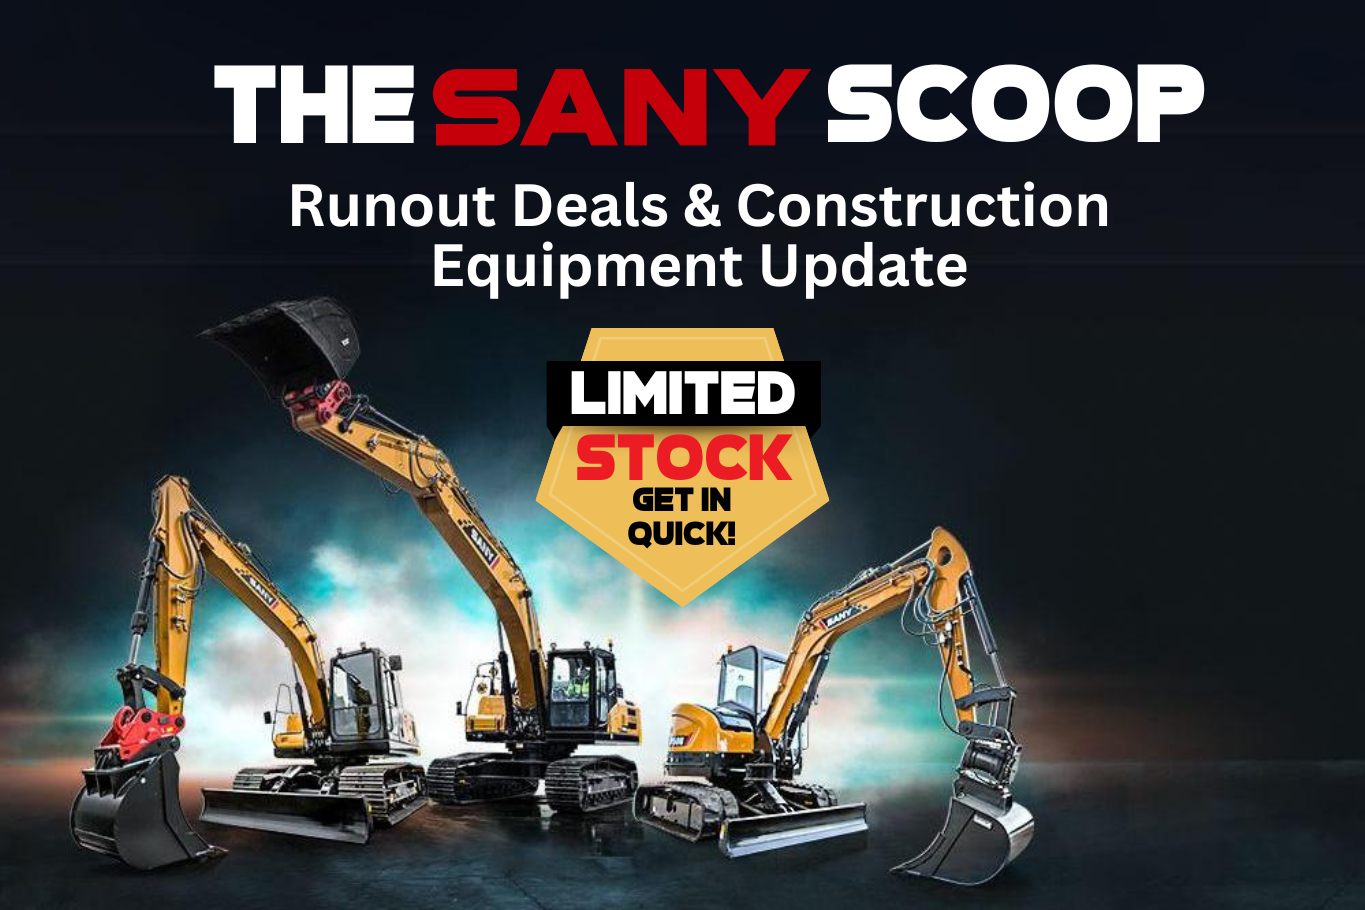 End of year runout deals